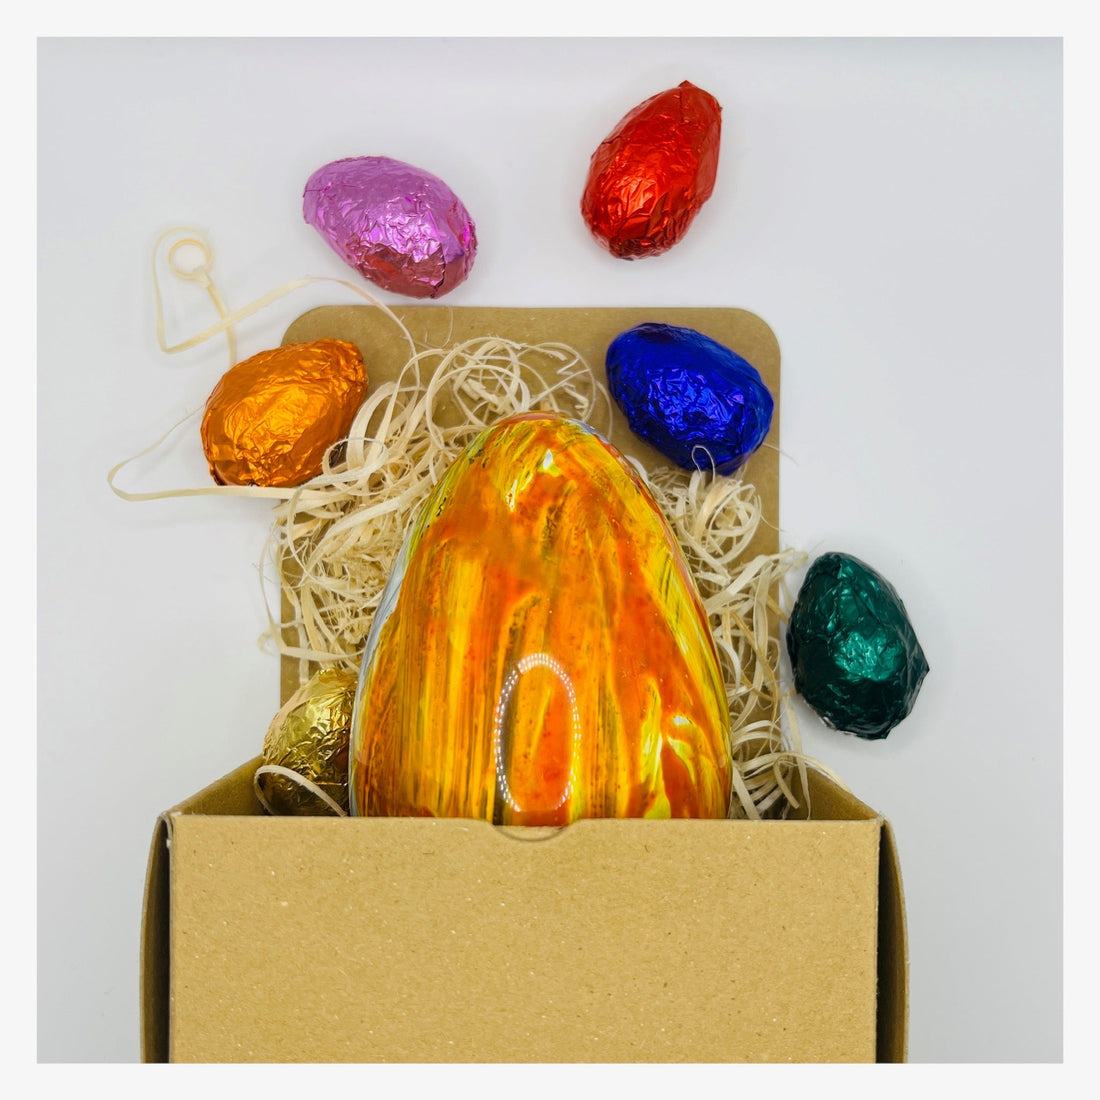 Celebrate Easter with Sam Joseph Chocolates' Handcrafted Delights!